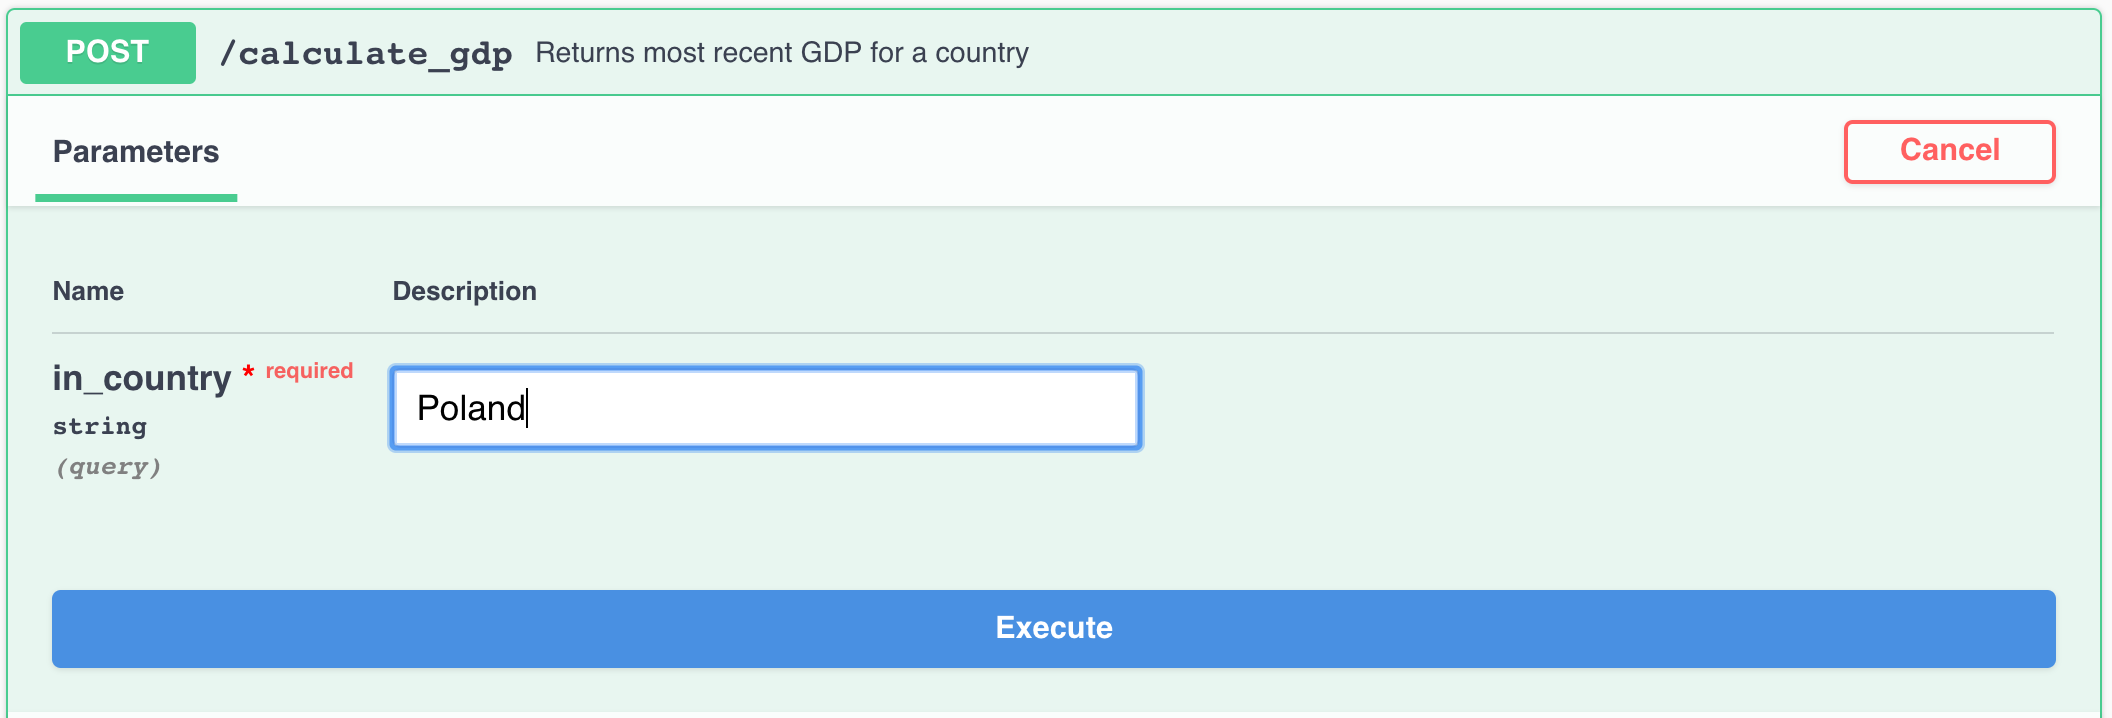 Image 11 - Testing out the /calculate_gdp endpoint for Poland